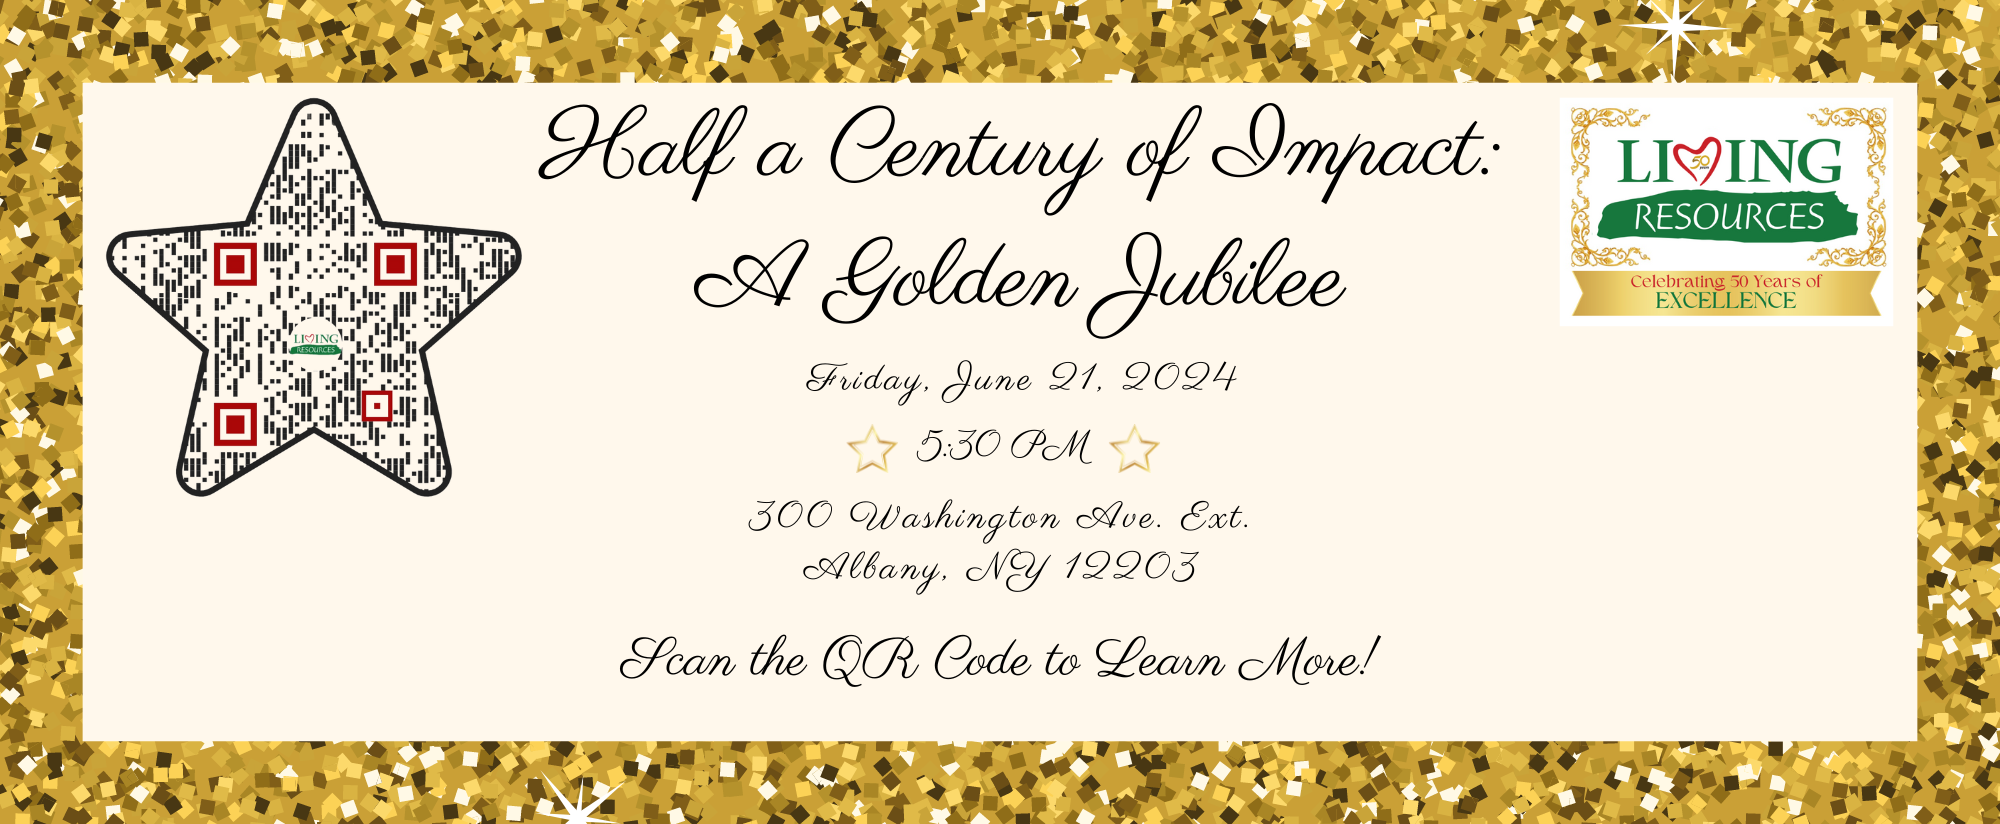 Text reads: Half a Century of Impact: A Golden Jubilee. Friday, June 21, 2024. 5:30 P.M. 300 Washington Ave. Ext. Albany NY 12203. Click here to join the celebration of Scan the QR Code to learn more! 